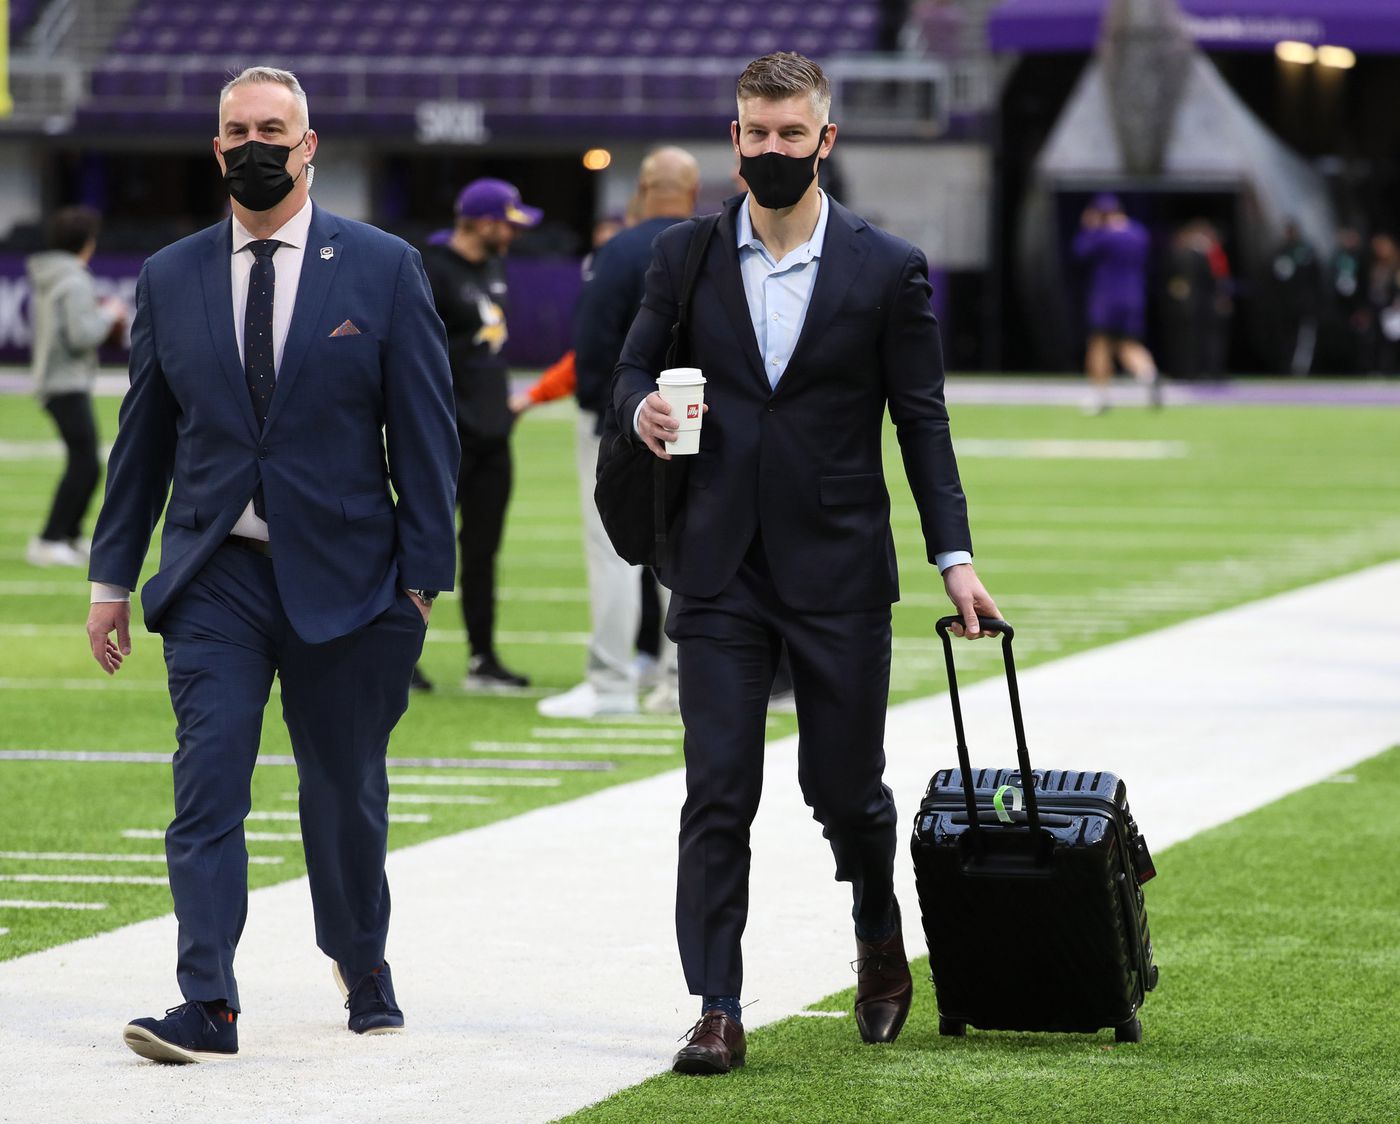 Bears GM Ryan Pace wheels his suitcase across the field before the start of a game against the Vikings at U.S. Bank Stadium on Jan. 9, 2022.